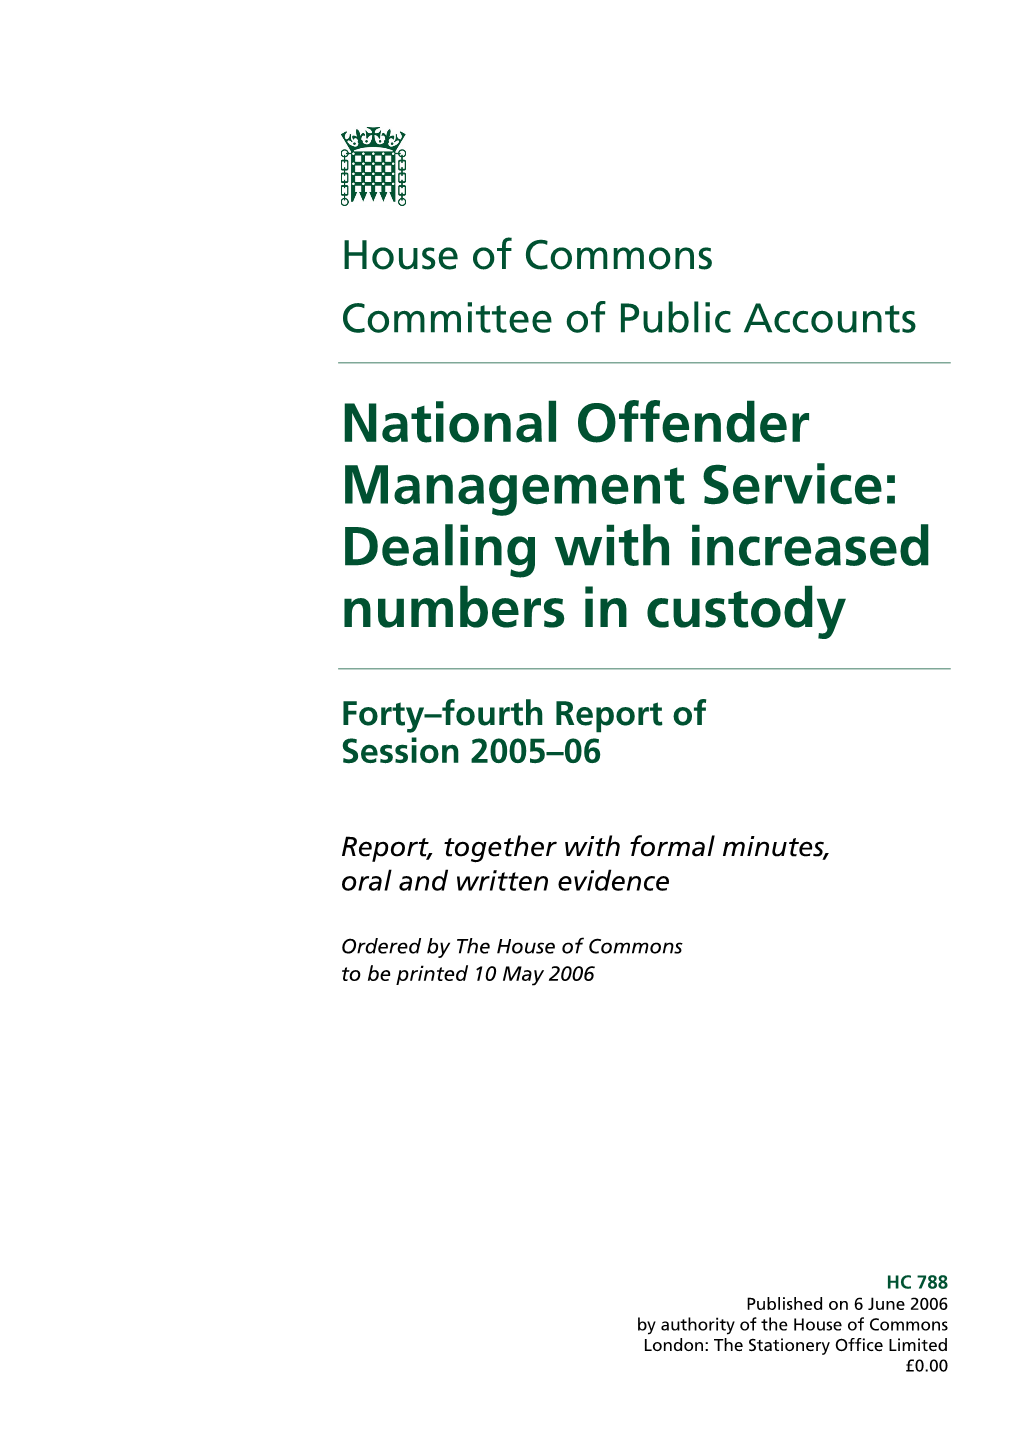 National Offender Management Service: Dealing with Increased Numbers in Custody